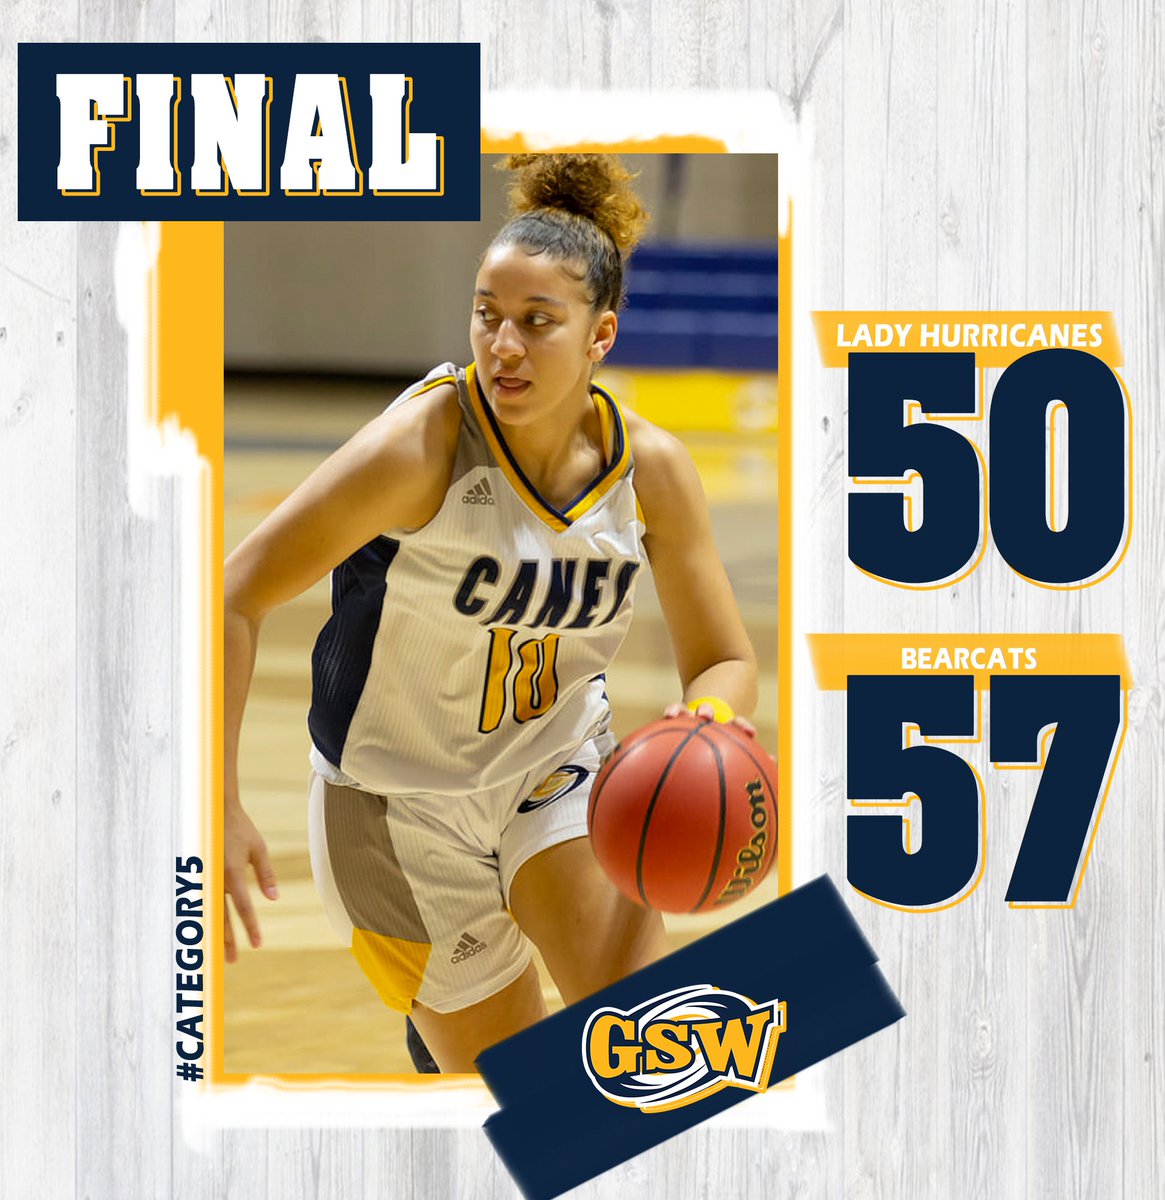 🏀| FINAL

No. 13 Lander barely escapes out the Storm Dome as @GSW_WBasketball drops their @PeachBelt Conference opener. 

J. Samuel (20 pts, 6 steals) and @jstorr_11 (13 pts) led the way while @_kaylagrant led the team with 14 rebounds.